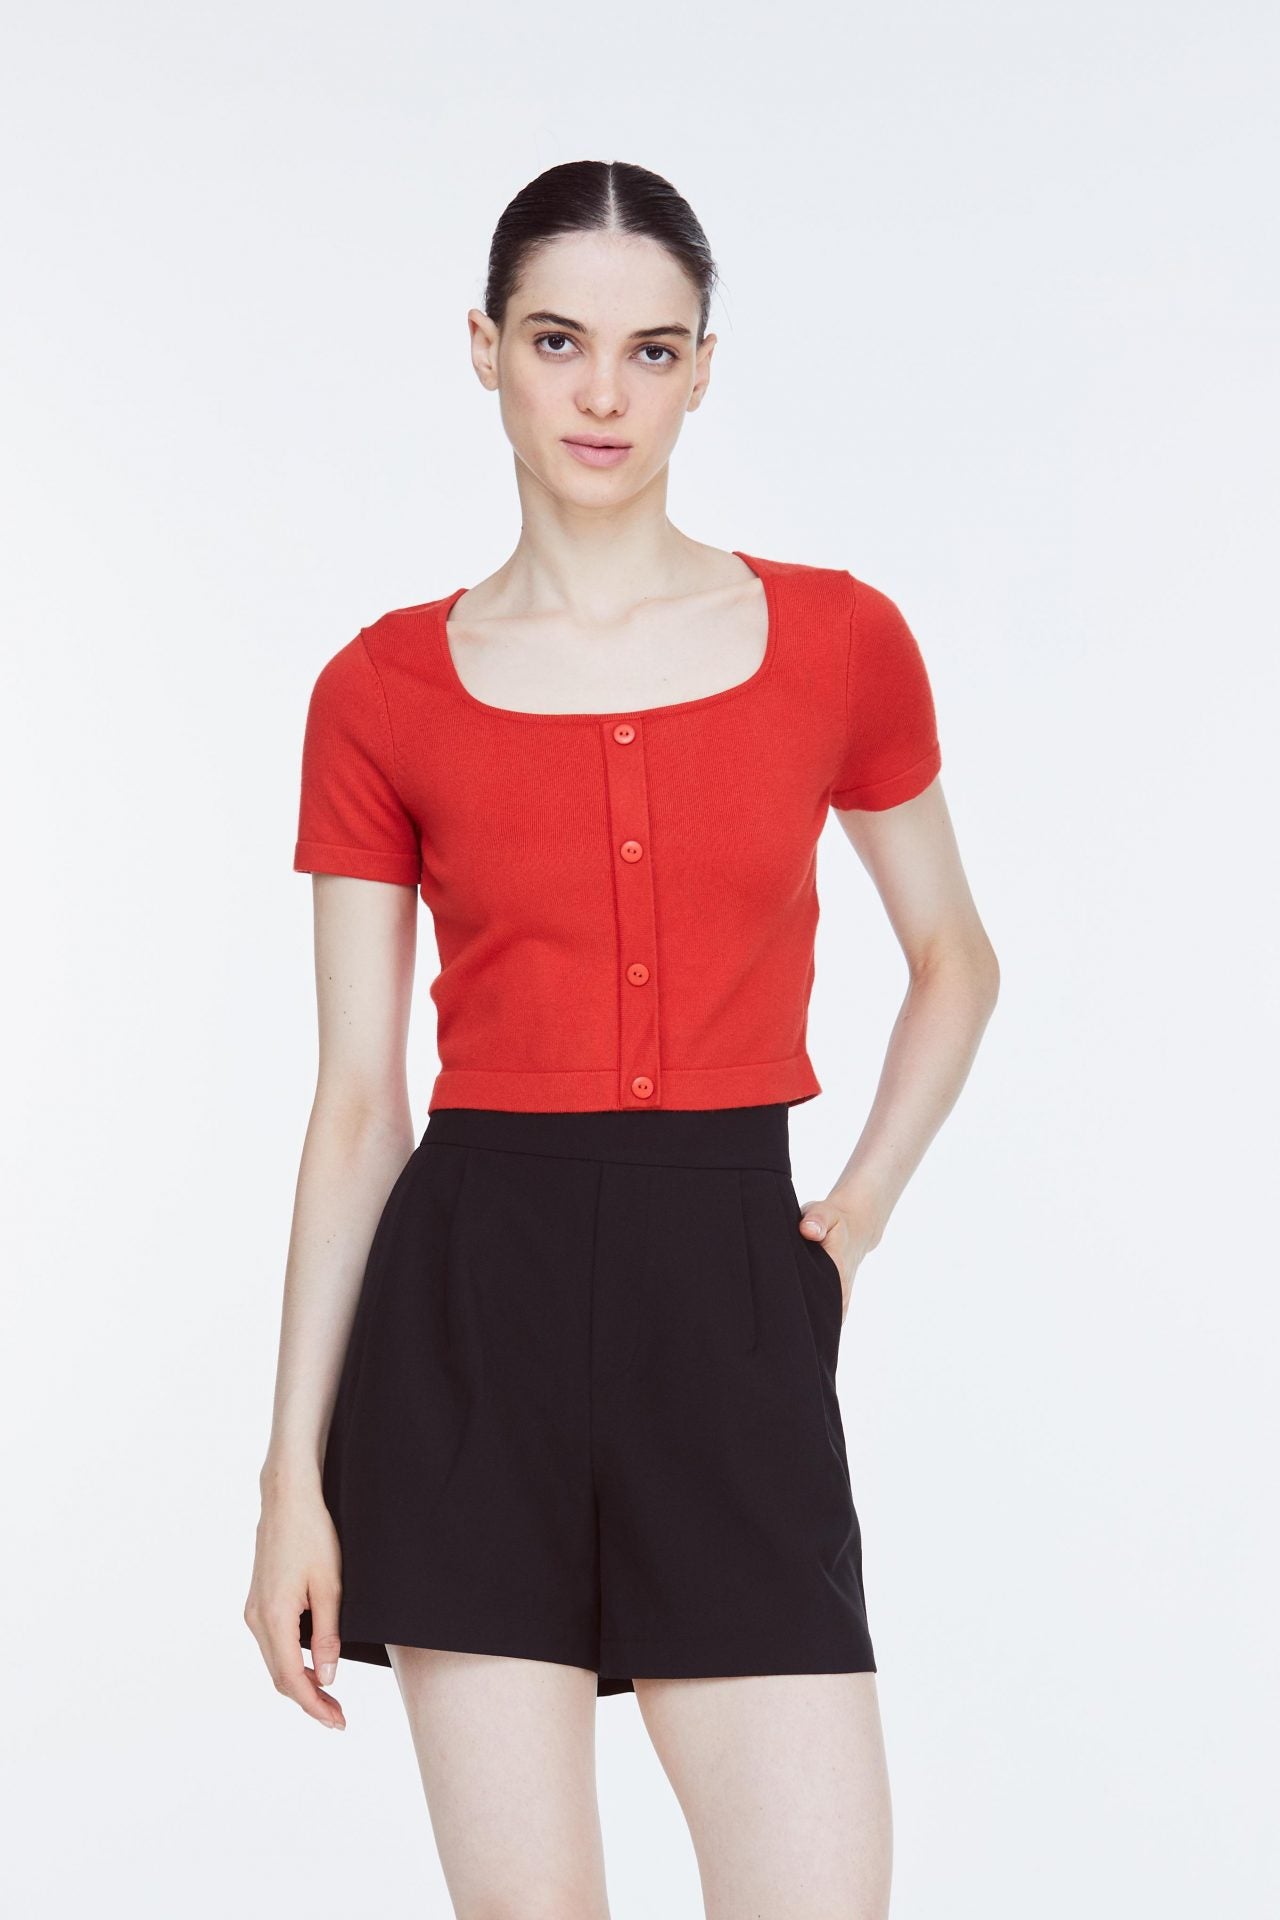 AK 10786 FRONT BUTTON TOP TANGERINE RED